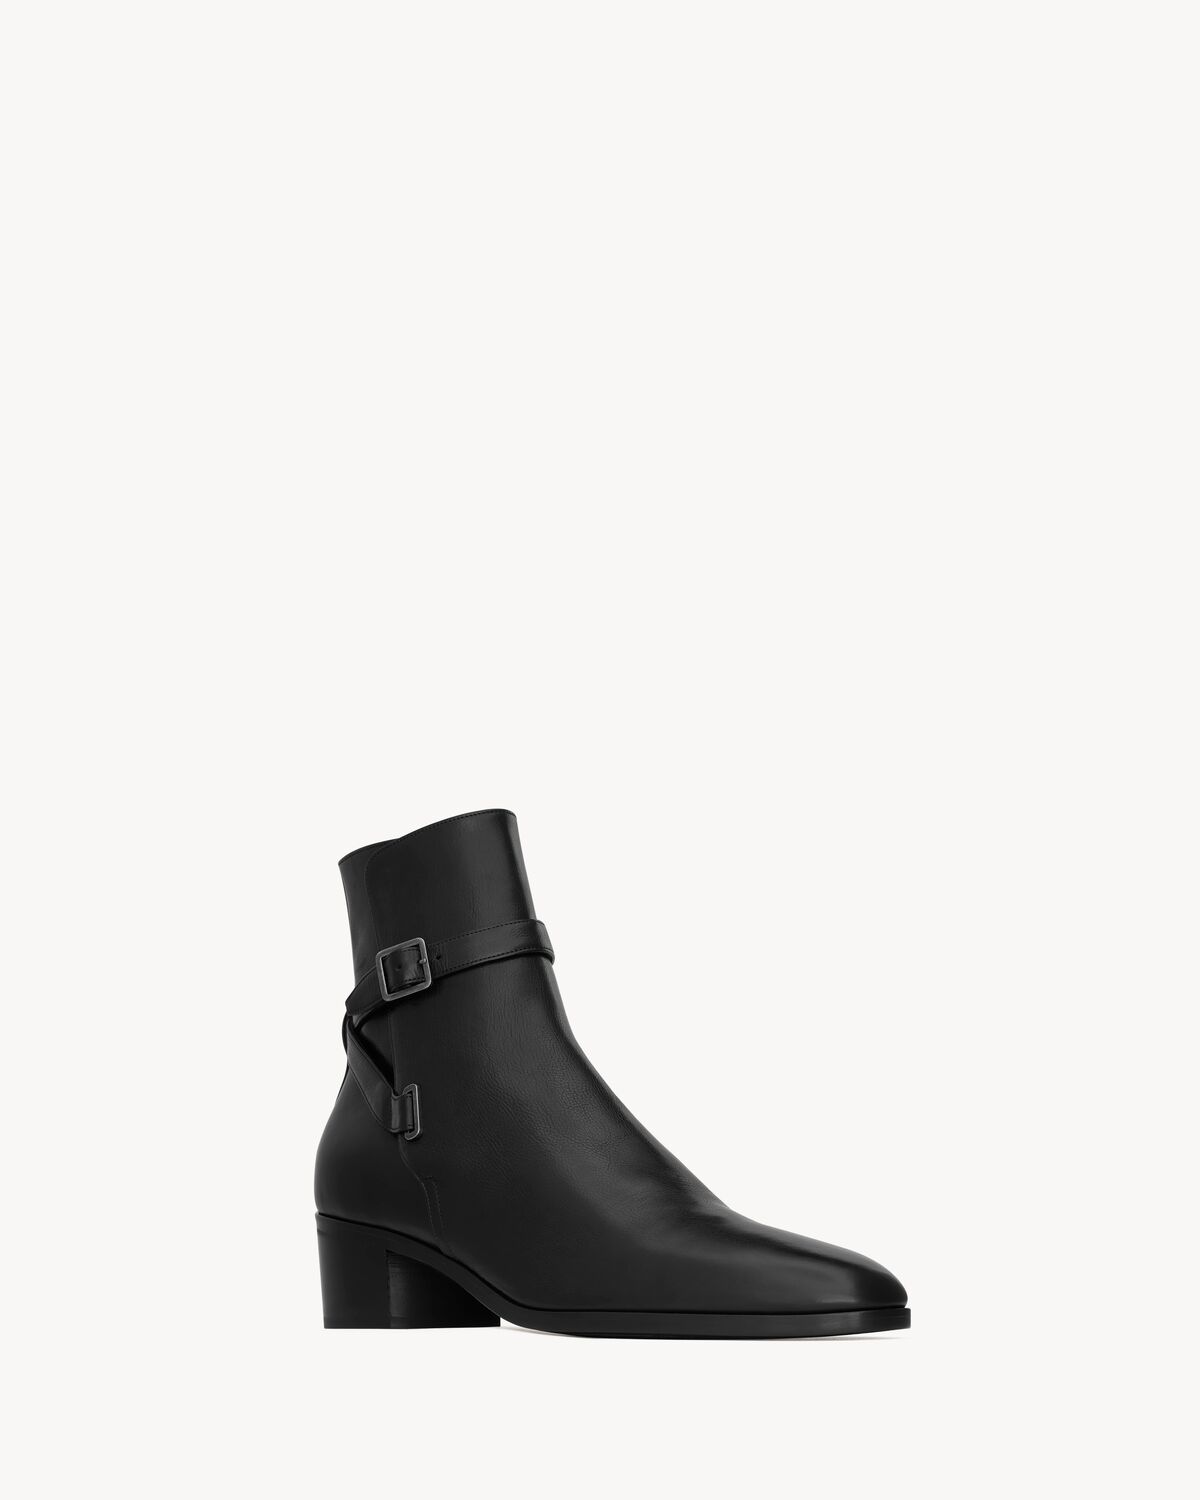 DORIAN jodhpur boots in smooth leather